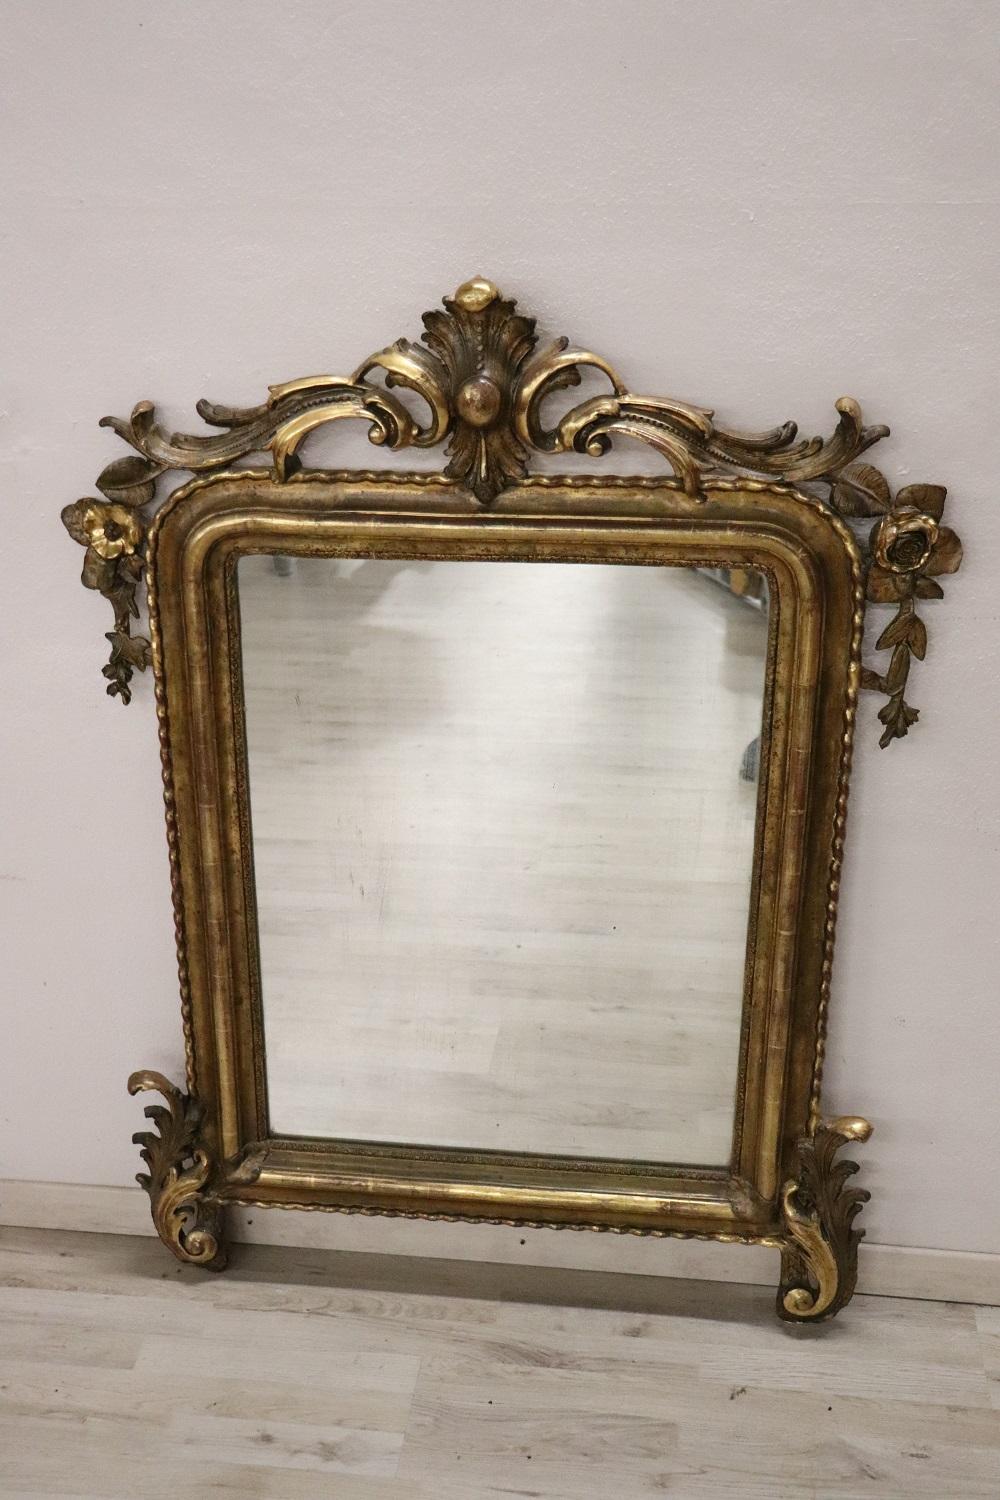 Beautiful elegant wall mirror of tehe period Louis Philippe 1845s wood hand carved with finely and richly swirls, curls and flowers. Refinement decorated in gold leaf. In good antique conditions. Antique mercury mirror.